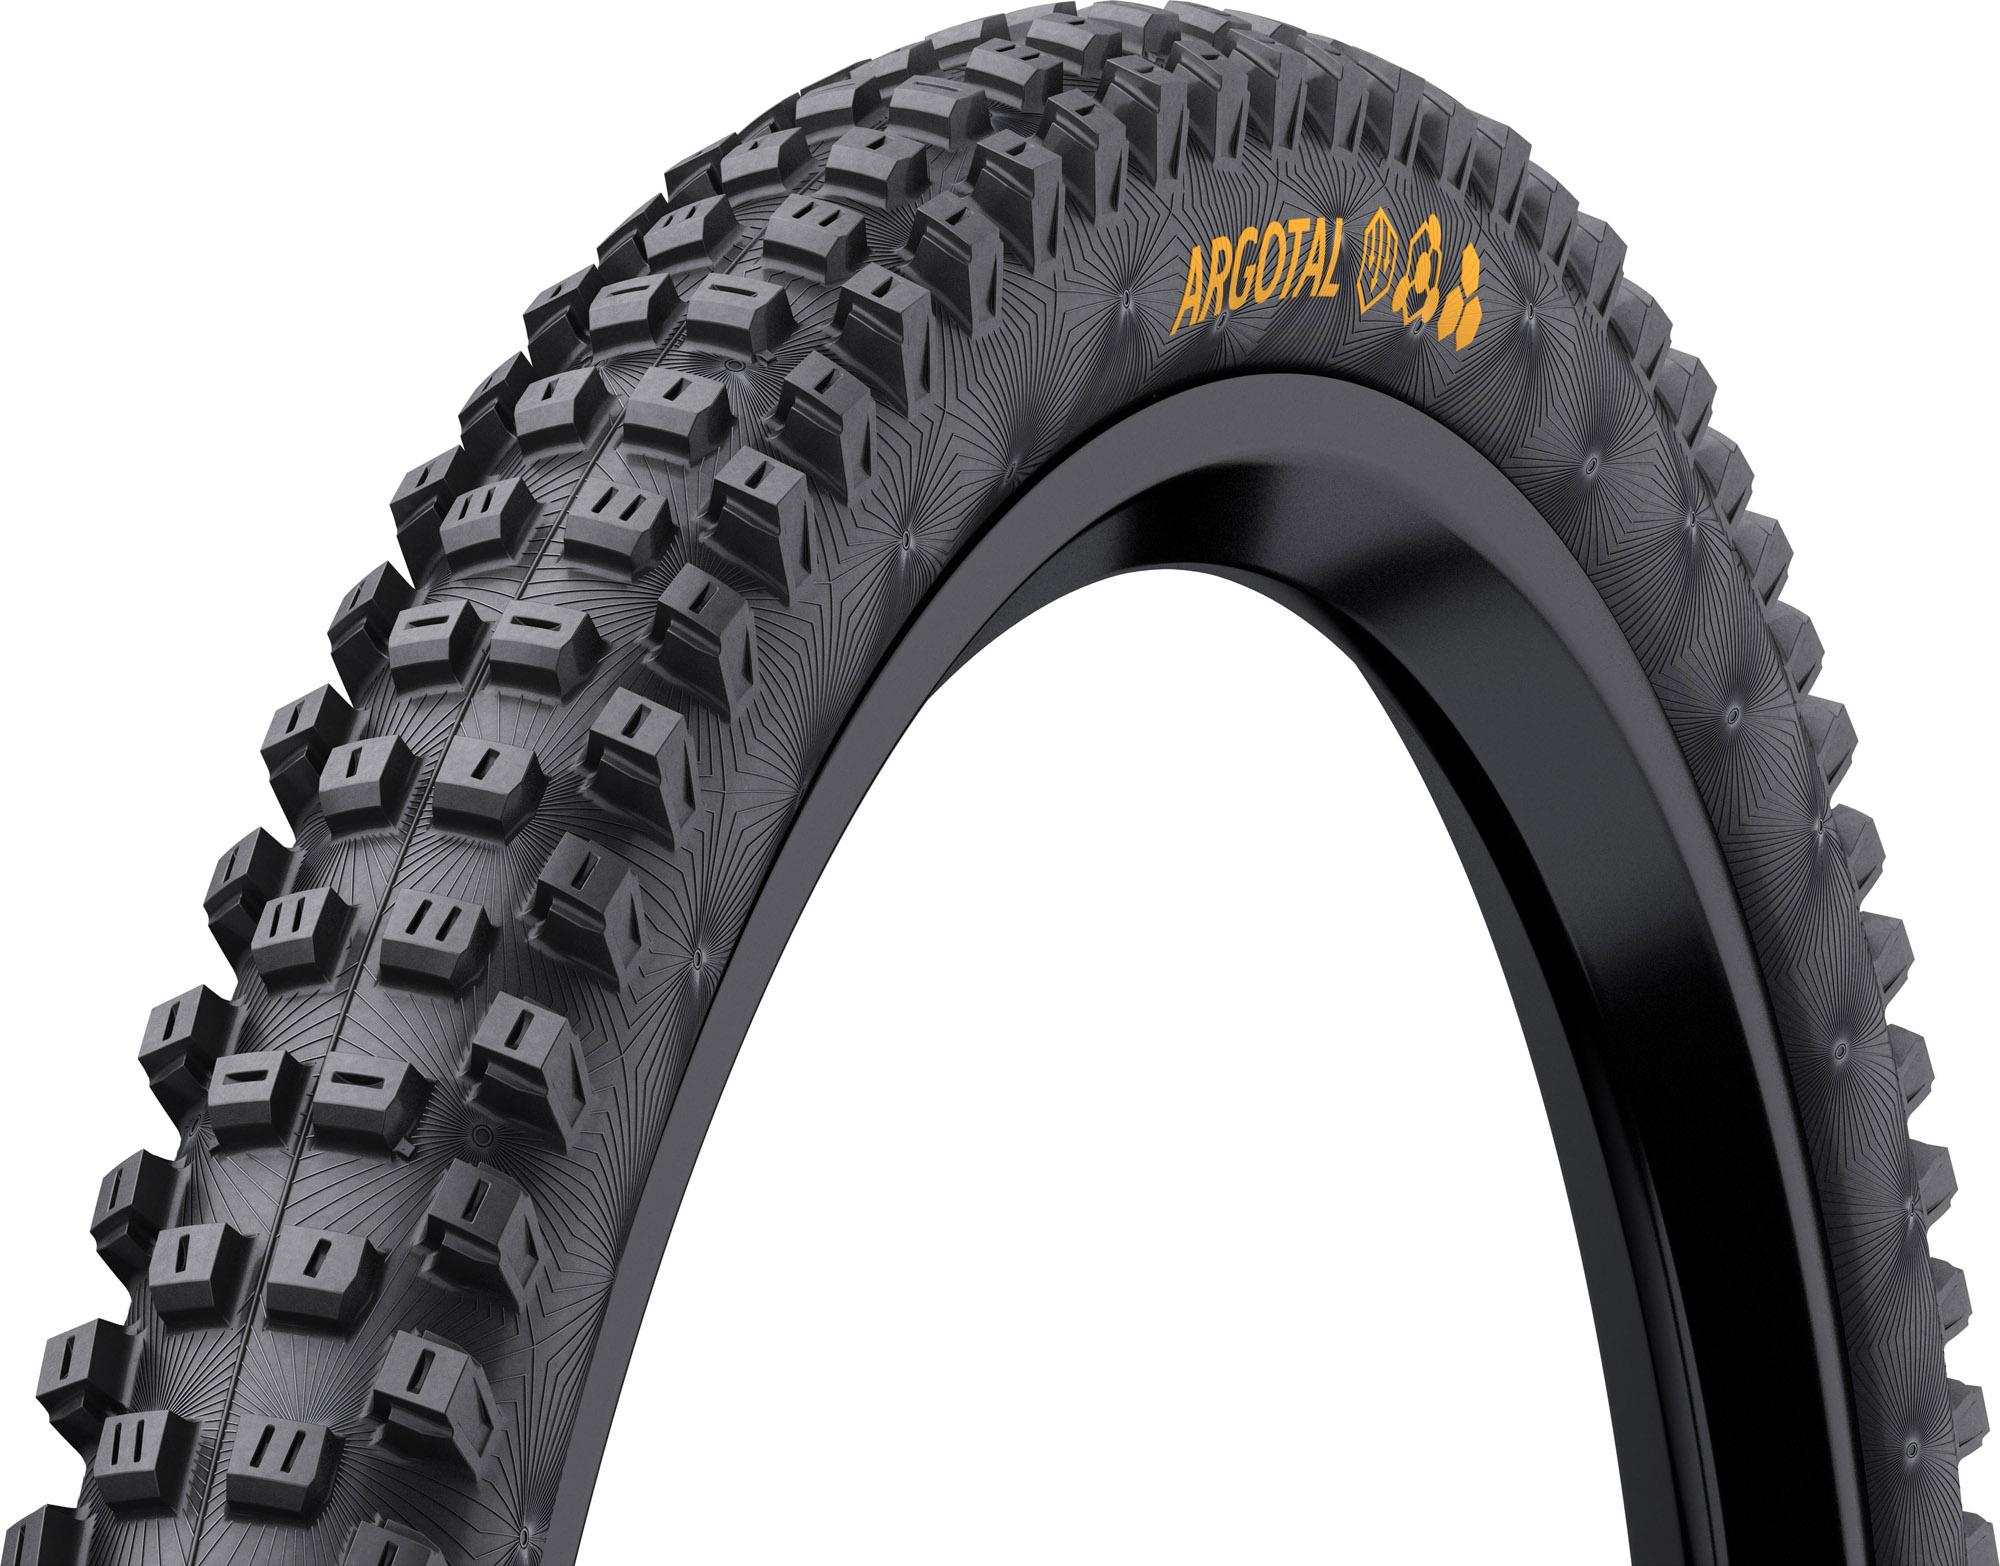 Continental Argotal Dh Mtb Tyre - Supersoft  Black